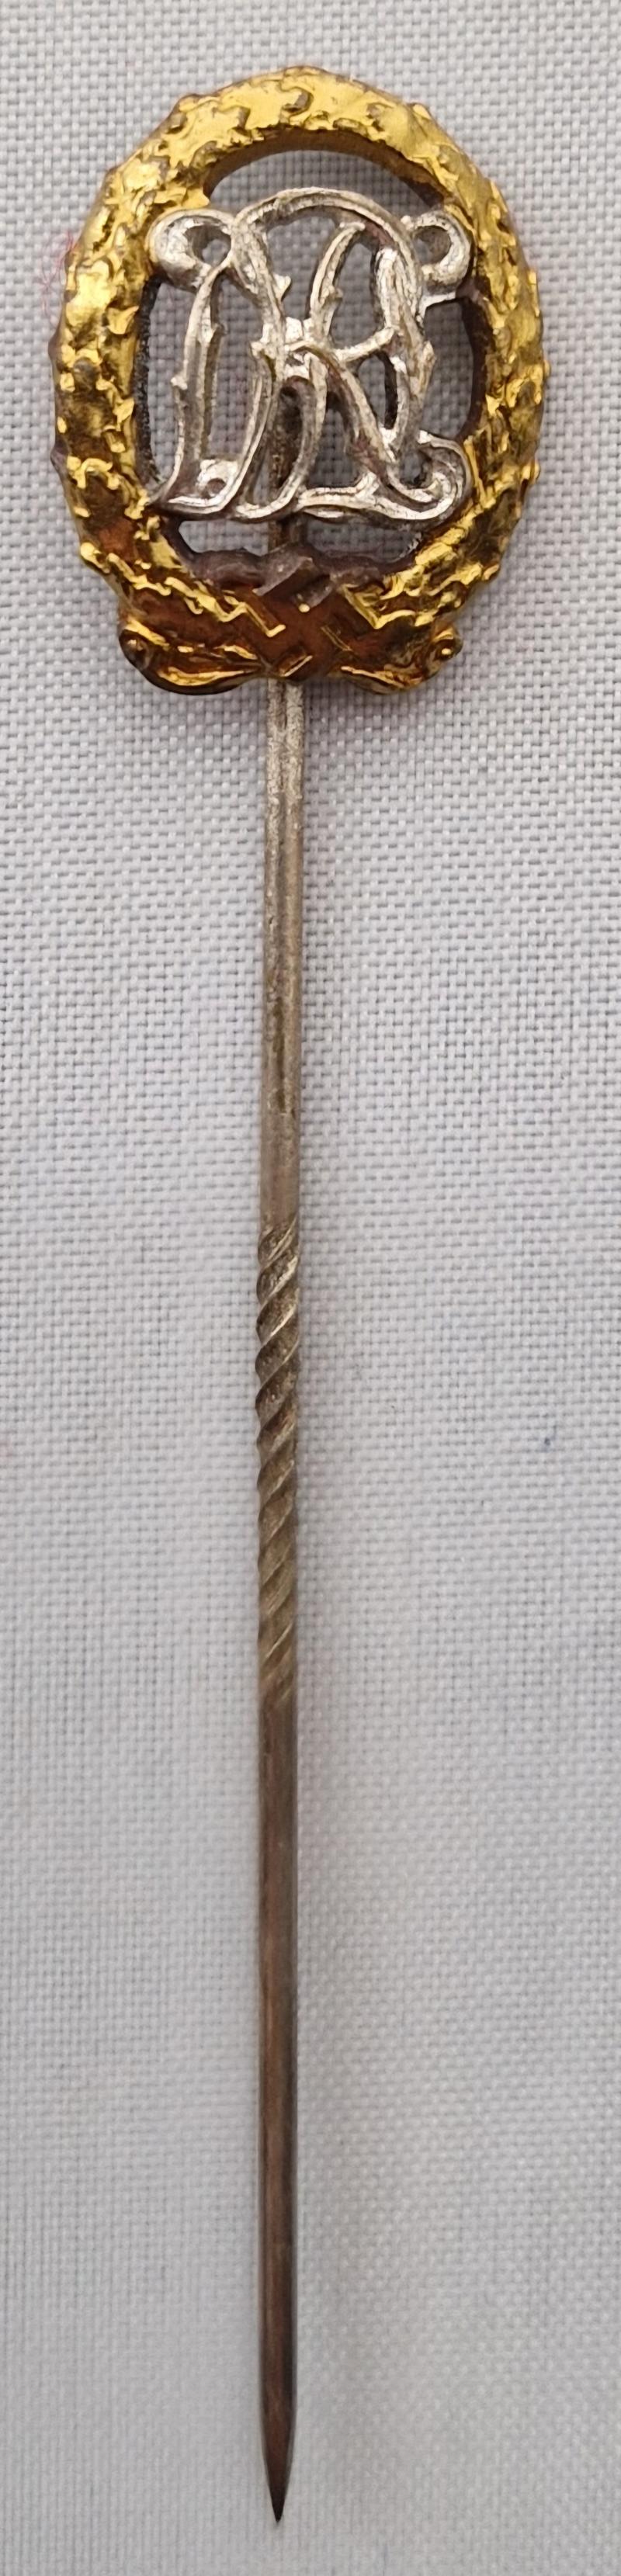 DRL silver/gold Sports Badge for War Wounded stickpin by Wernstein Jena.